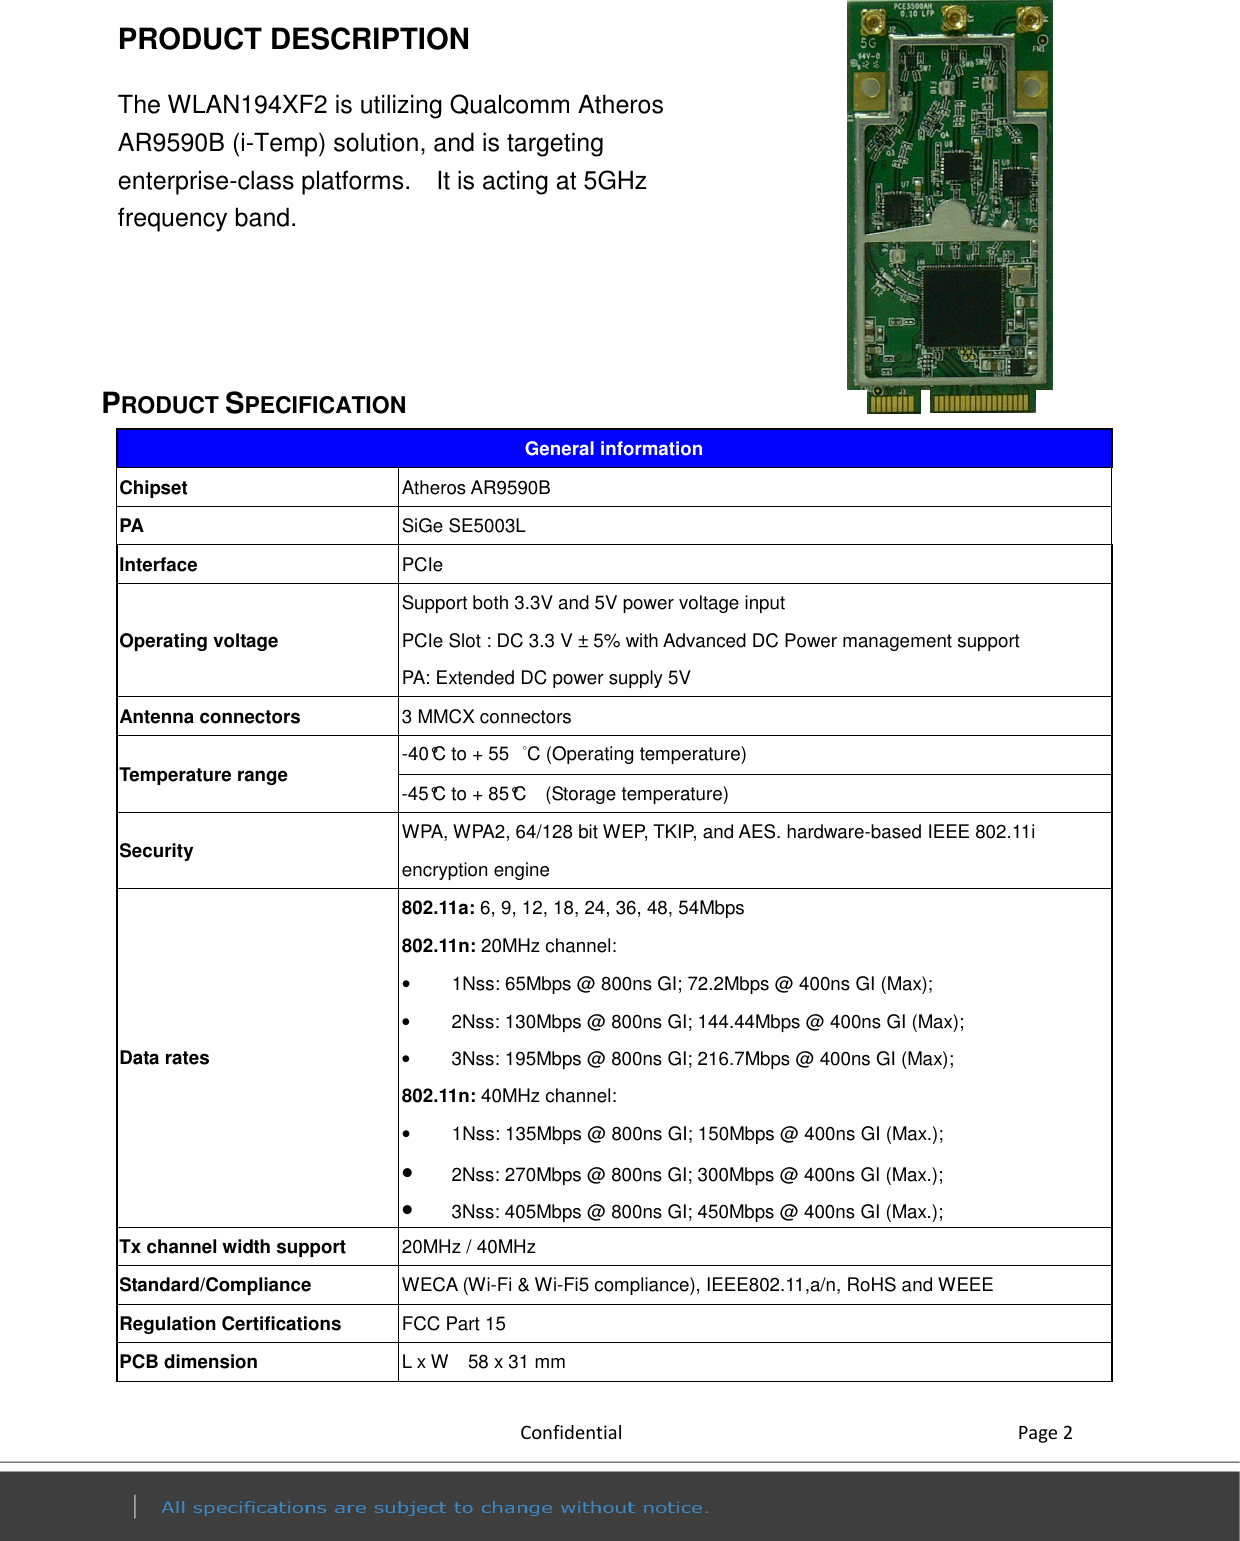           Confidential    Page 2 PRODUCT DESCRIPTION                       The WLAN194XF2 is utilizing Qualcomm Atheros AR9590B (i-Temp) solution, and is targeting enterprise-class platforms.    It is acting at 5GHz frequency band.        PRODUCT SPECIFICATION General information Chipset  Atheros AR9590B PA  SiGe SE5003L Interface  PCIe   Operating voltage Support both 3.3V and 5V power voltage input PCIe Slot : DC 3.3 V ± 5% with Advanced DC Power management support   PA: Extended DC power supply 5V Antenna connectors  3 MMCX connectors   Temperature range  -40°C to + 55  °C (Operating temperature)   -45°C to + 85°C    (Storage temperature)   Security  WPA, WPA2, 64/128 bit WEP, TKIP, and AES. hardware-based IEEE 802.11i encryption engine   Data rates 802.11a: 6, 9, 12, 18, 24, 36, 48, 54Mbps 802.11n: 20MHz channel: •  1Nss: 65Mbps @ 800ns GI; 72.2Mbps @ 400ns GI (Max); •  2Nss: 130Mbps @ 800ns GI; 144.44Mbps @ 400ns GI (Max); •  3Nss: 195Mbps @ 800ns GI; 216.7Mbps @ 400ns GI (Max); 802.11n: 40MHz channel: •  1Nss: 135Mbps @ 800ns GI; 150Mbps @ 400ns GI (Max.); • 2Nss: 270Mbps @ 800ns GI; 300Mbps @ 400ns GI (Max.); • 3Nss: 405Mbps @ 800ns GI; 450Mbps @ 400ns GI (Max.); Tx channel width support  20MHz / 40MHz Standard/Compliance  WECA (Wi-Fi &amp; Wi-Fi5 compliance), IEEE802.11,a/n, RoHS and WEEE   Regulation Certifications  FCC Part 15   PCB dimension  L x W    58 x 31 mm 